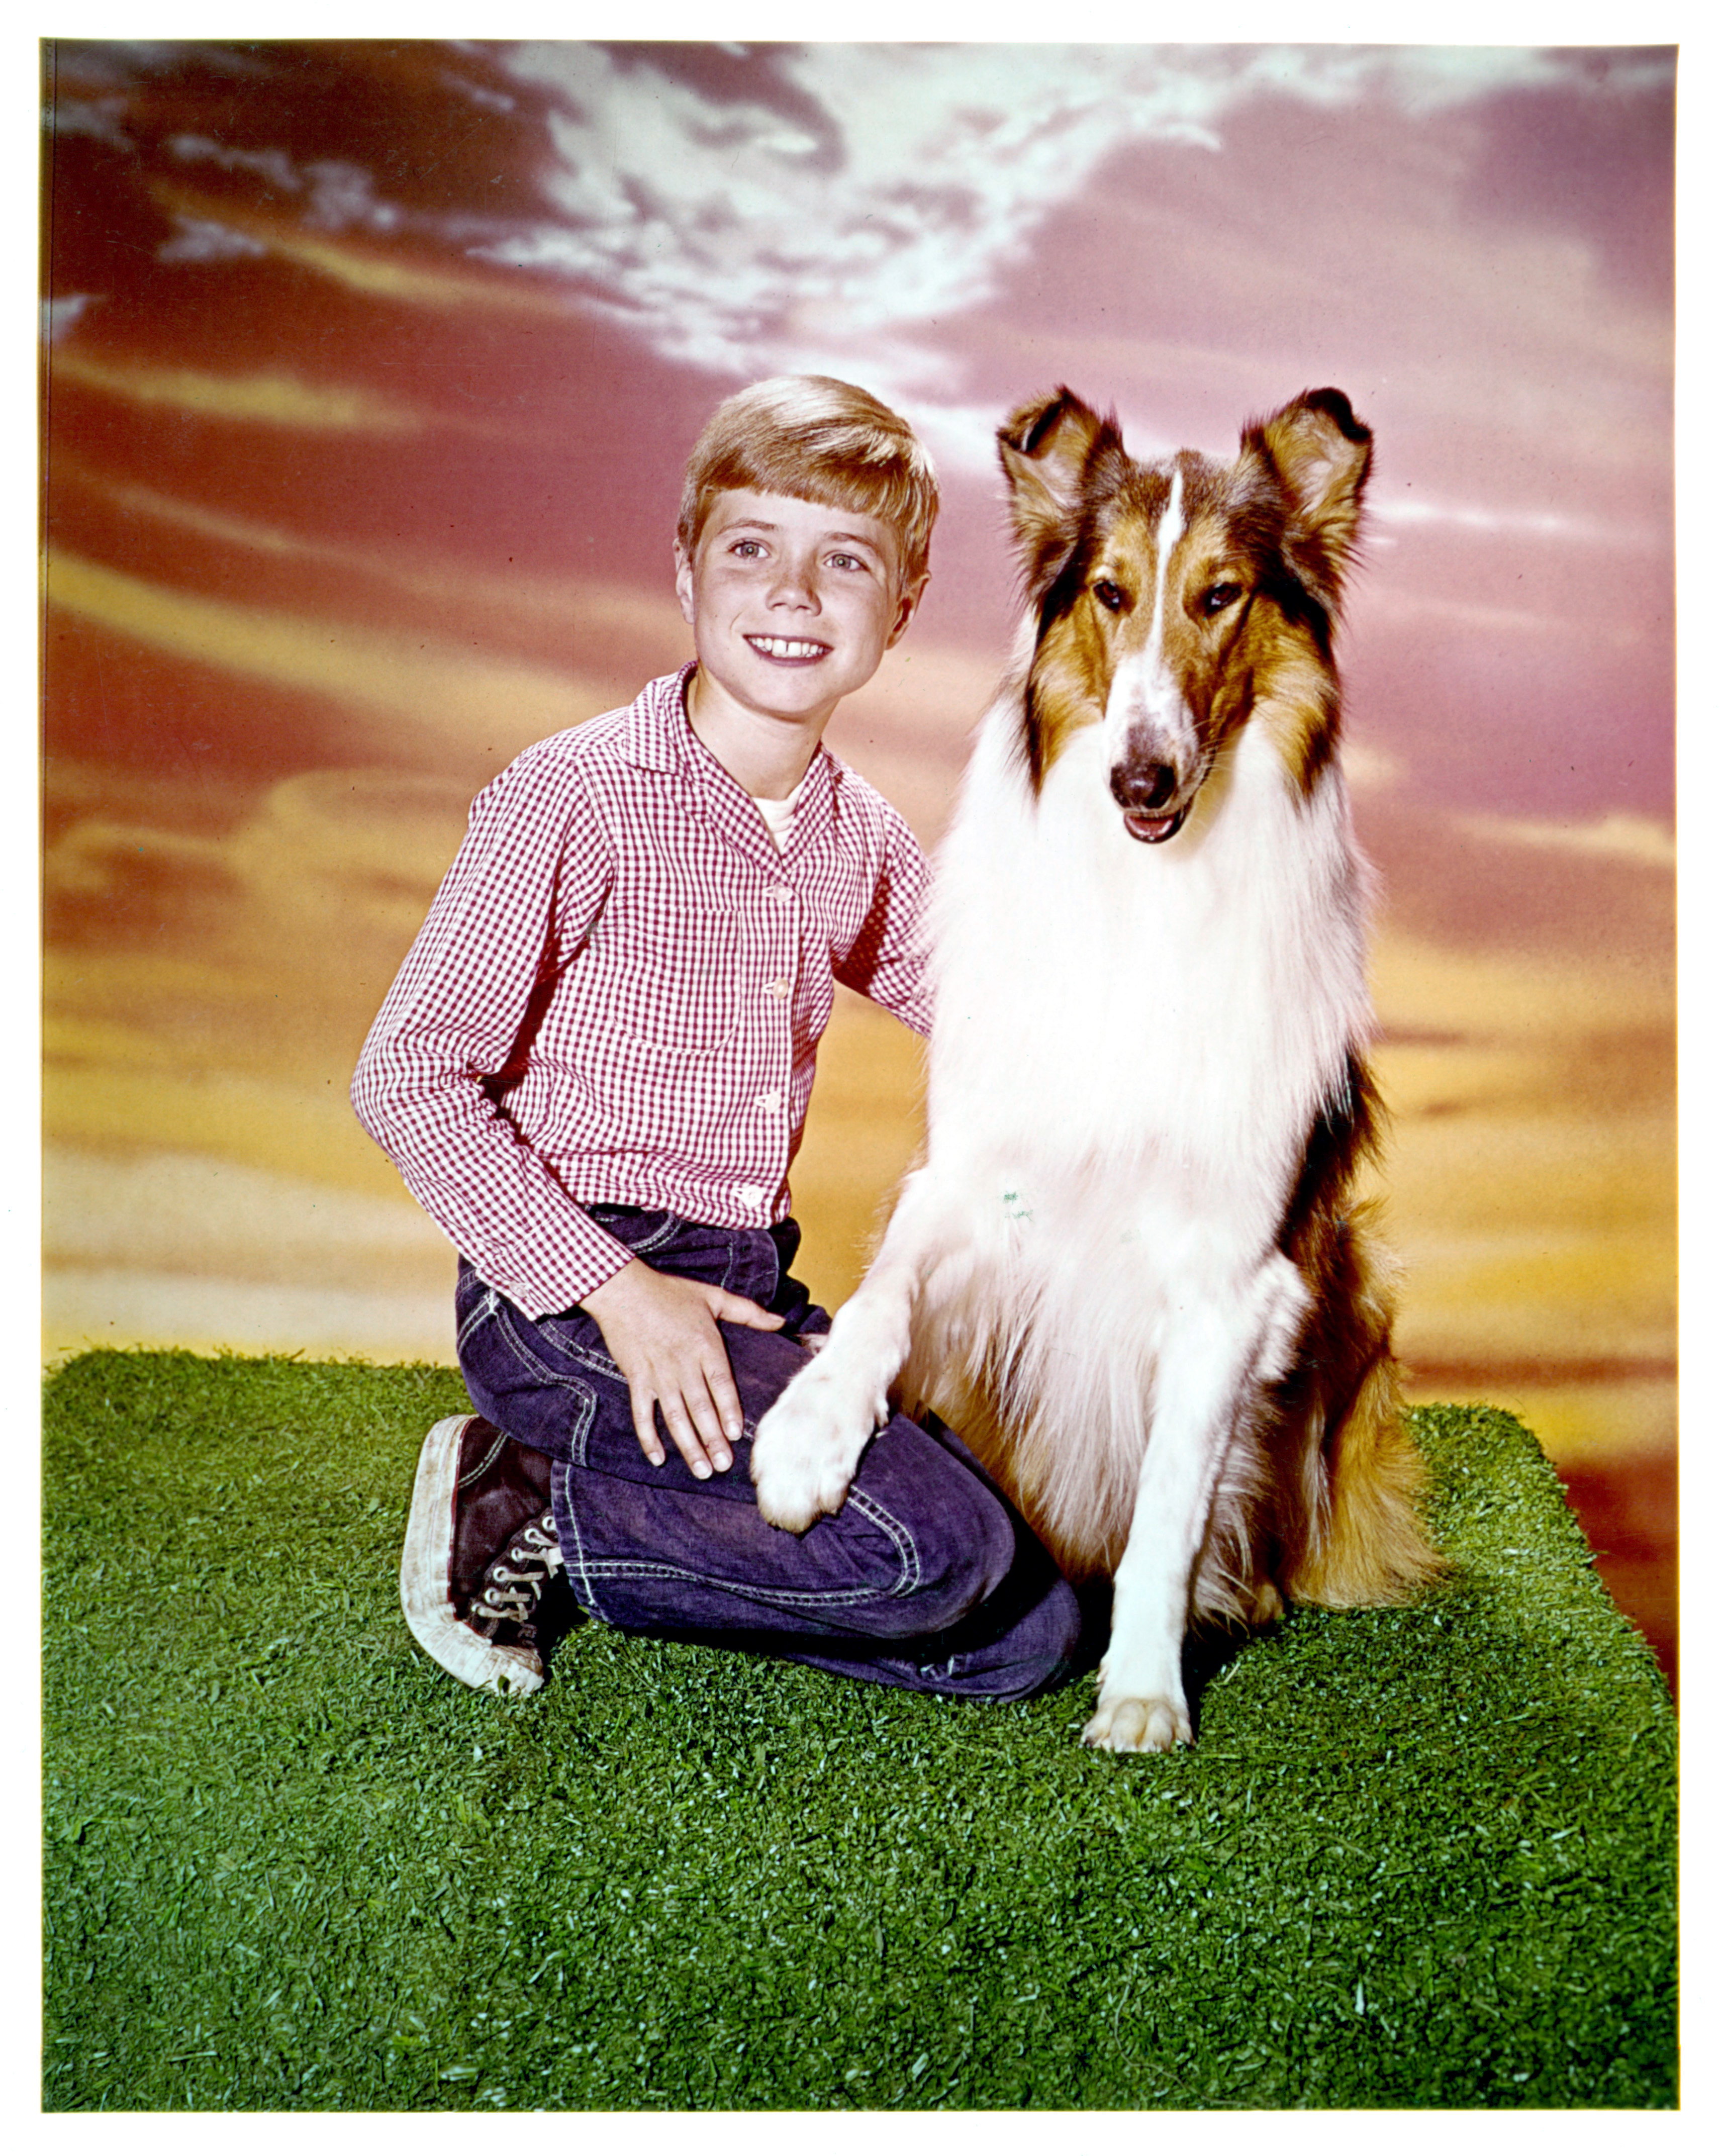 Jon Provost and Lassie in a publicity portrait for the television series "Lassie," circa 1954 | Source: Getty Images